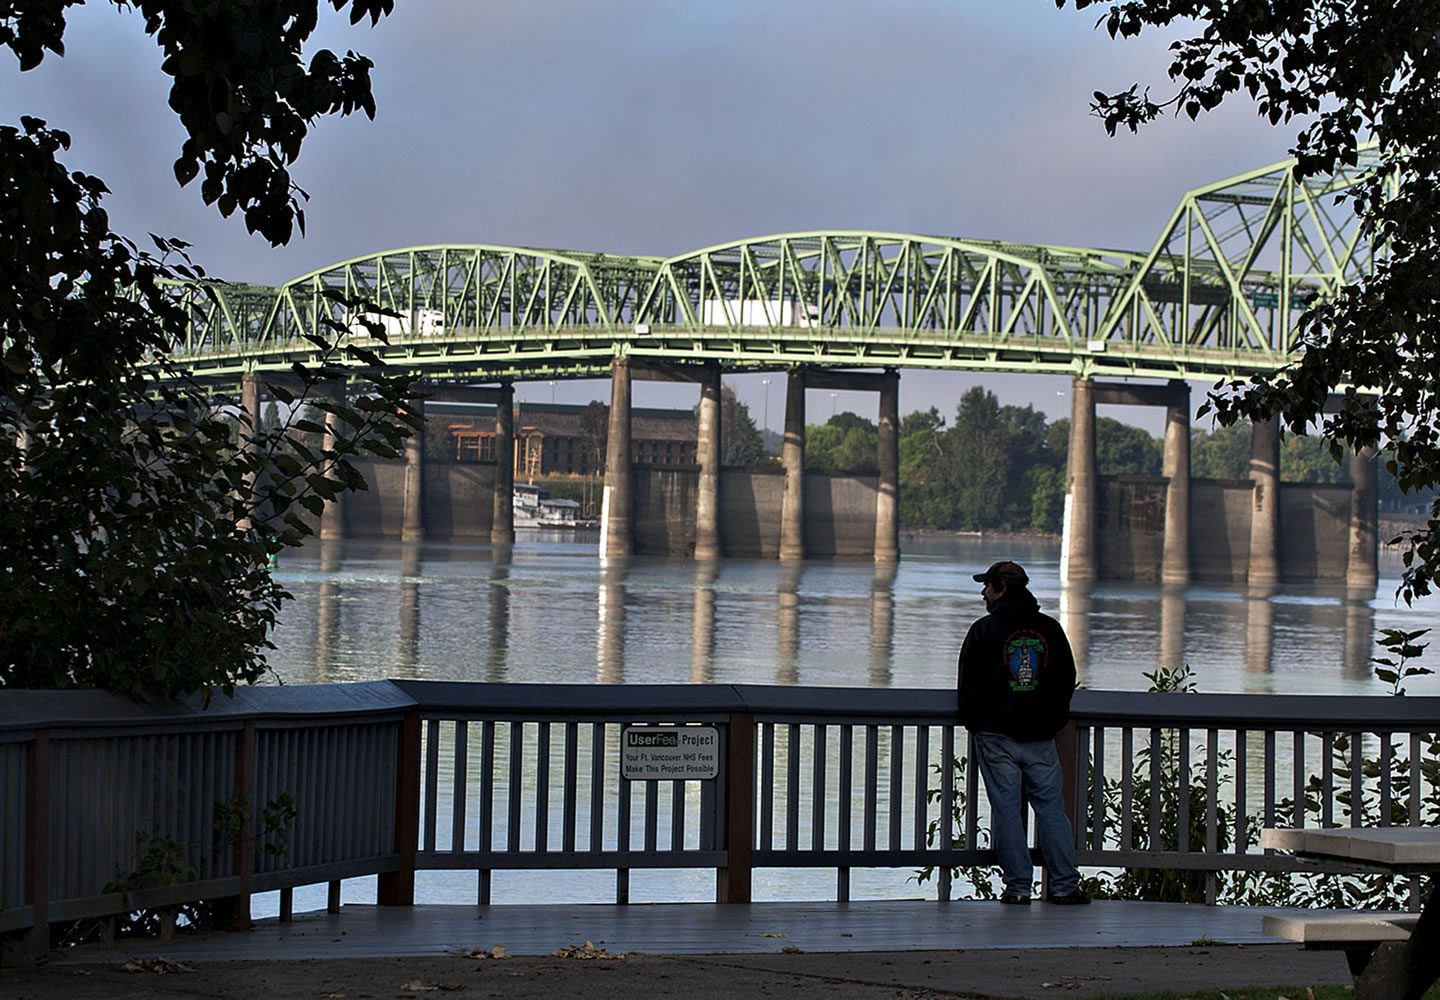 Jeff McBride of Vancouver spends a peaceful moment before work checking out scenic views of the Interstate Bridge and the Columbia River on Thursday morning, Sept. 3, 2015. McBride, who has lived in the area for 10 years, said he is looking forward to the development of the waterfront area.